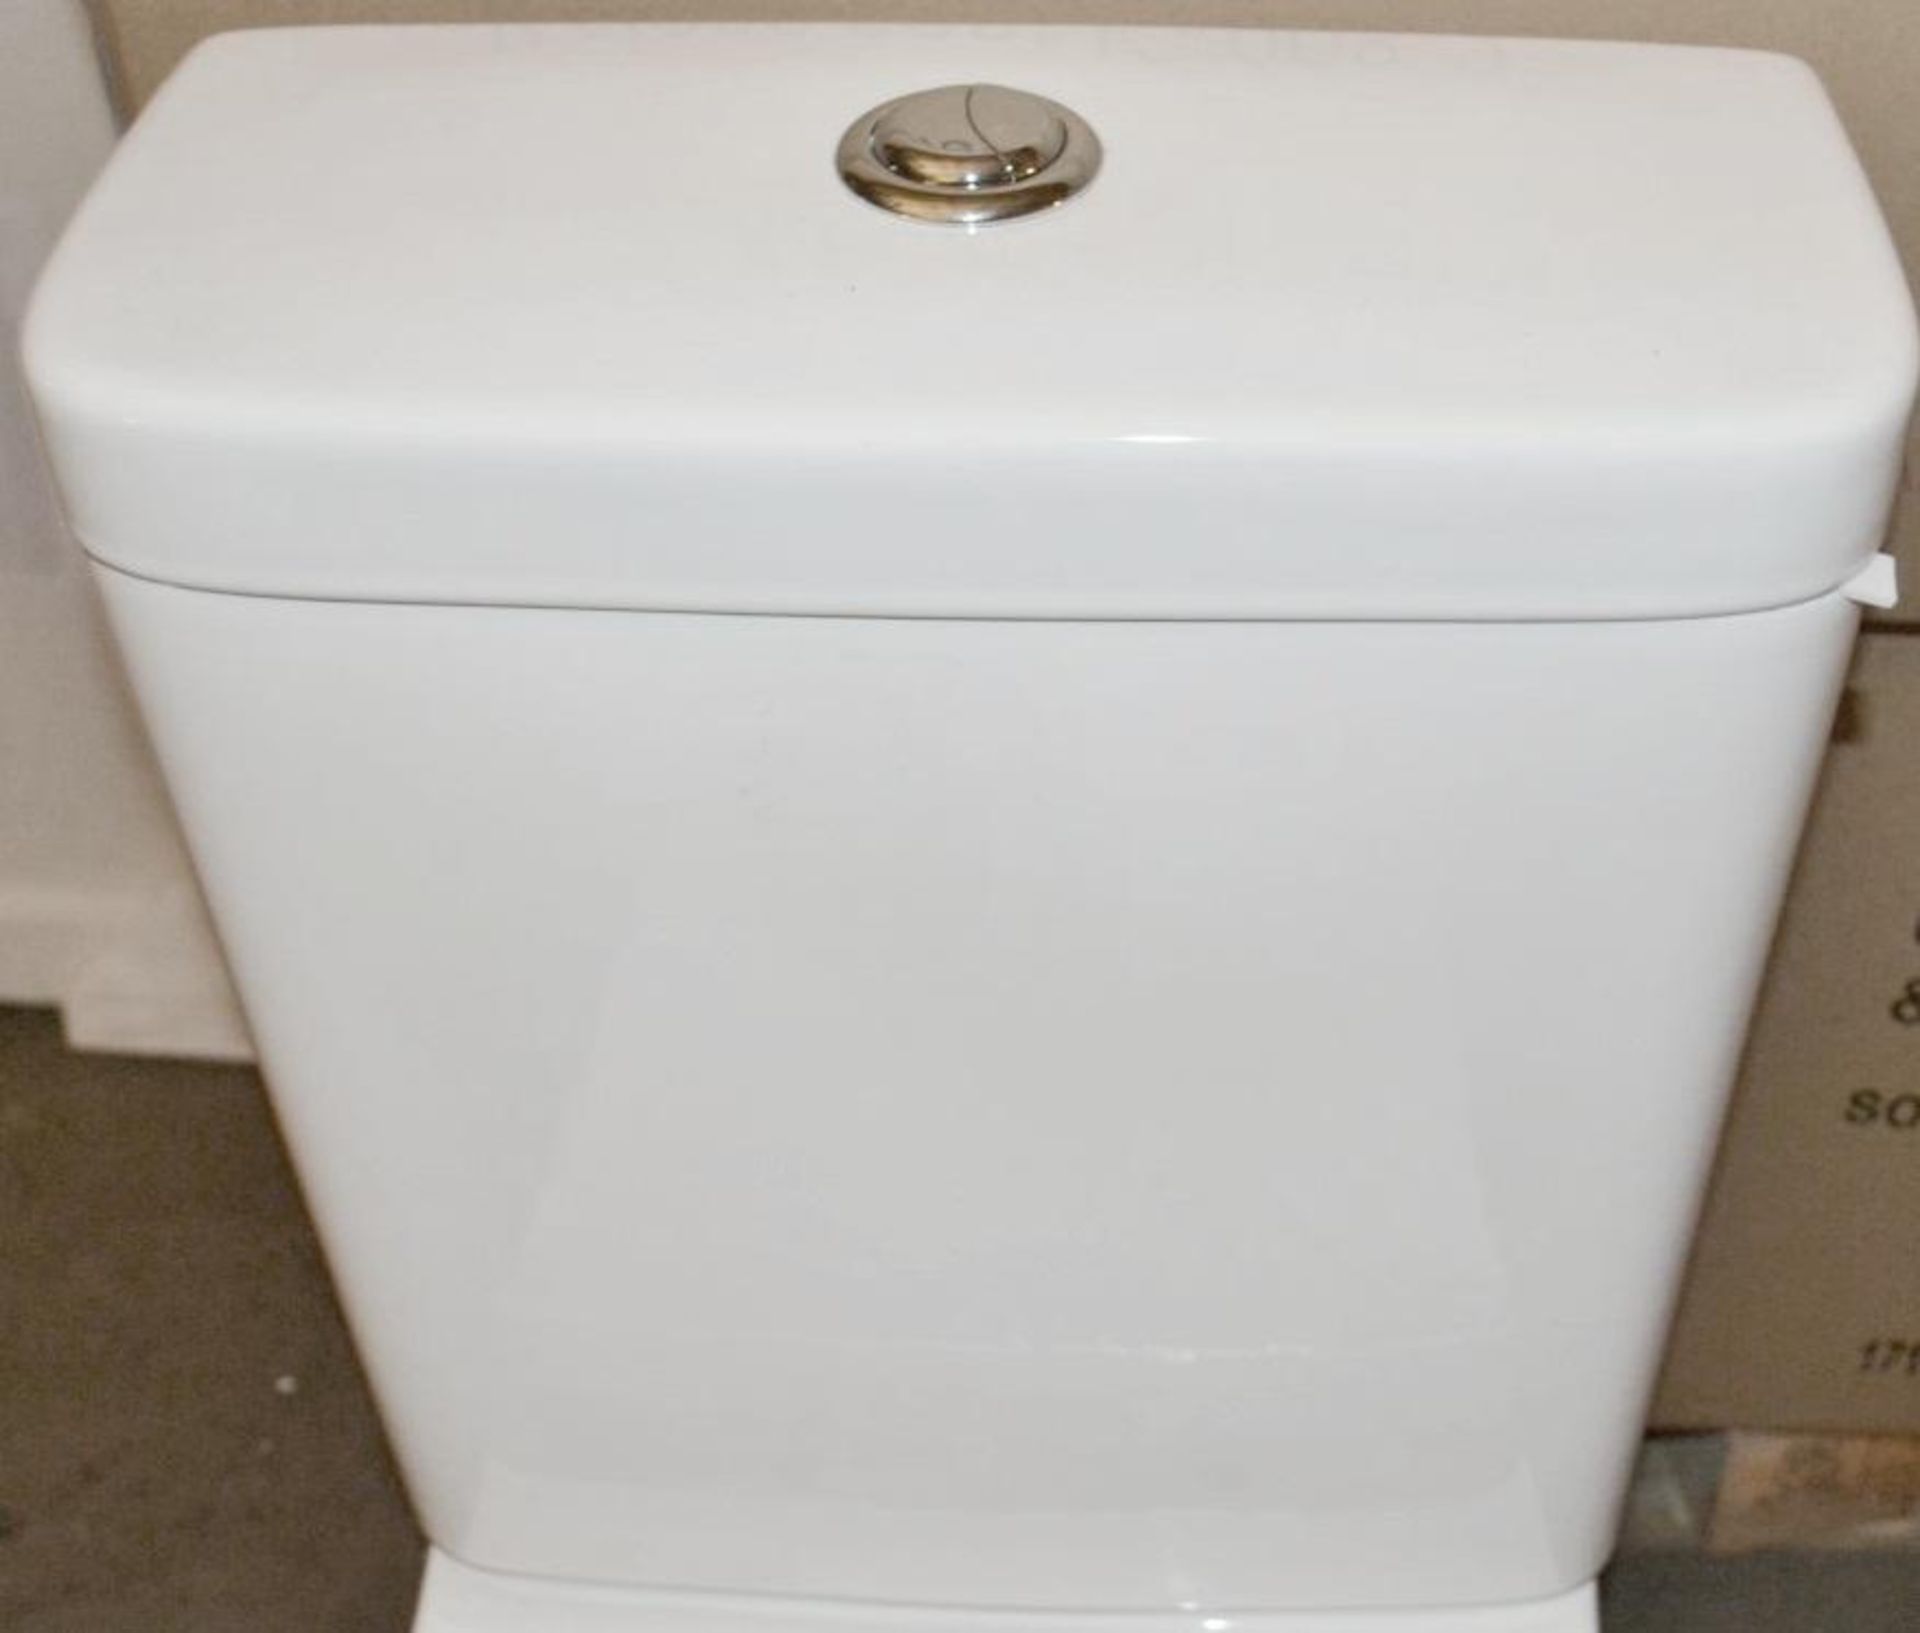 1 x Close Coupled Toilet Pan With Soft Close Toilet Seat And Cistern (Inc. Fittings) - Brand New Box - Image 12 of 12